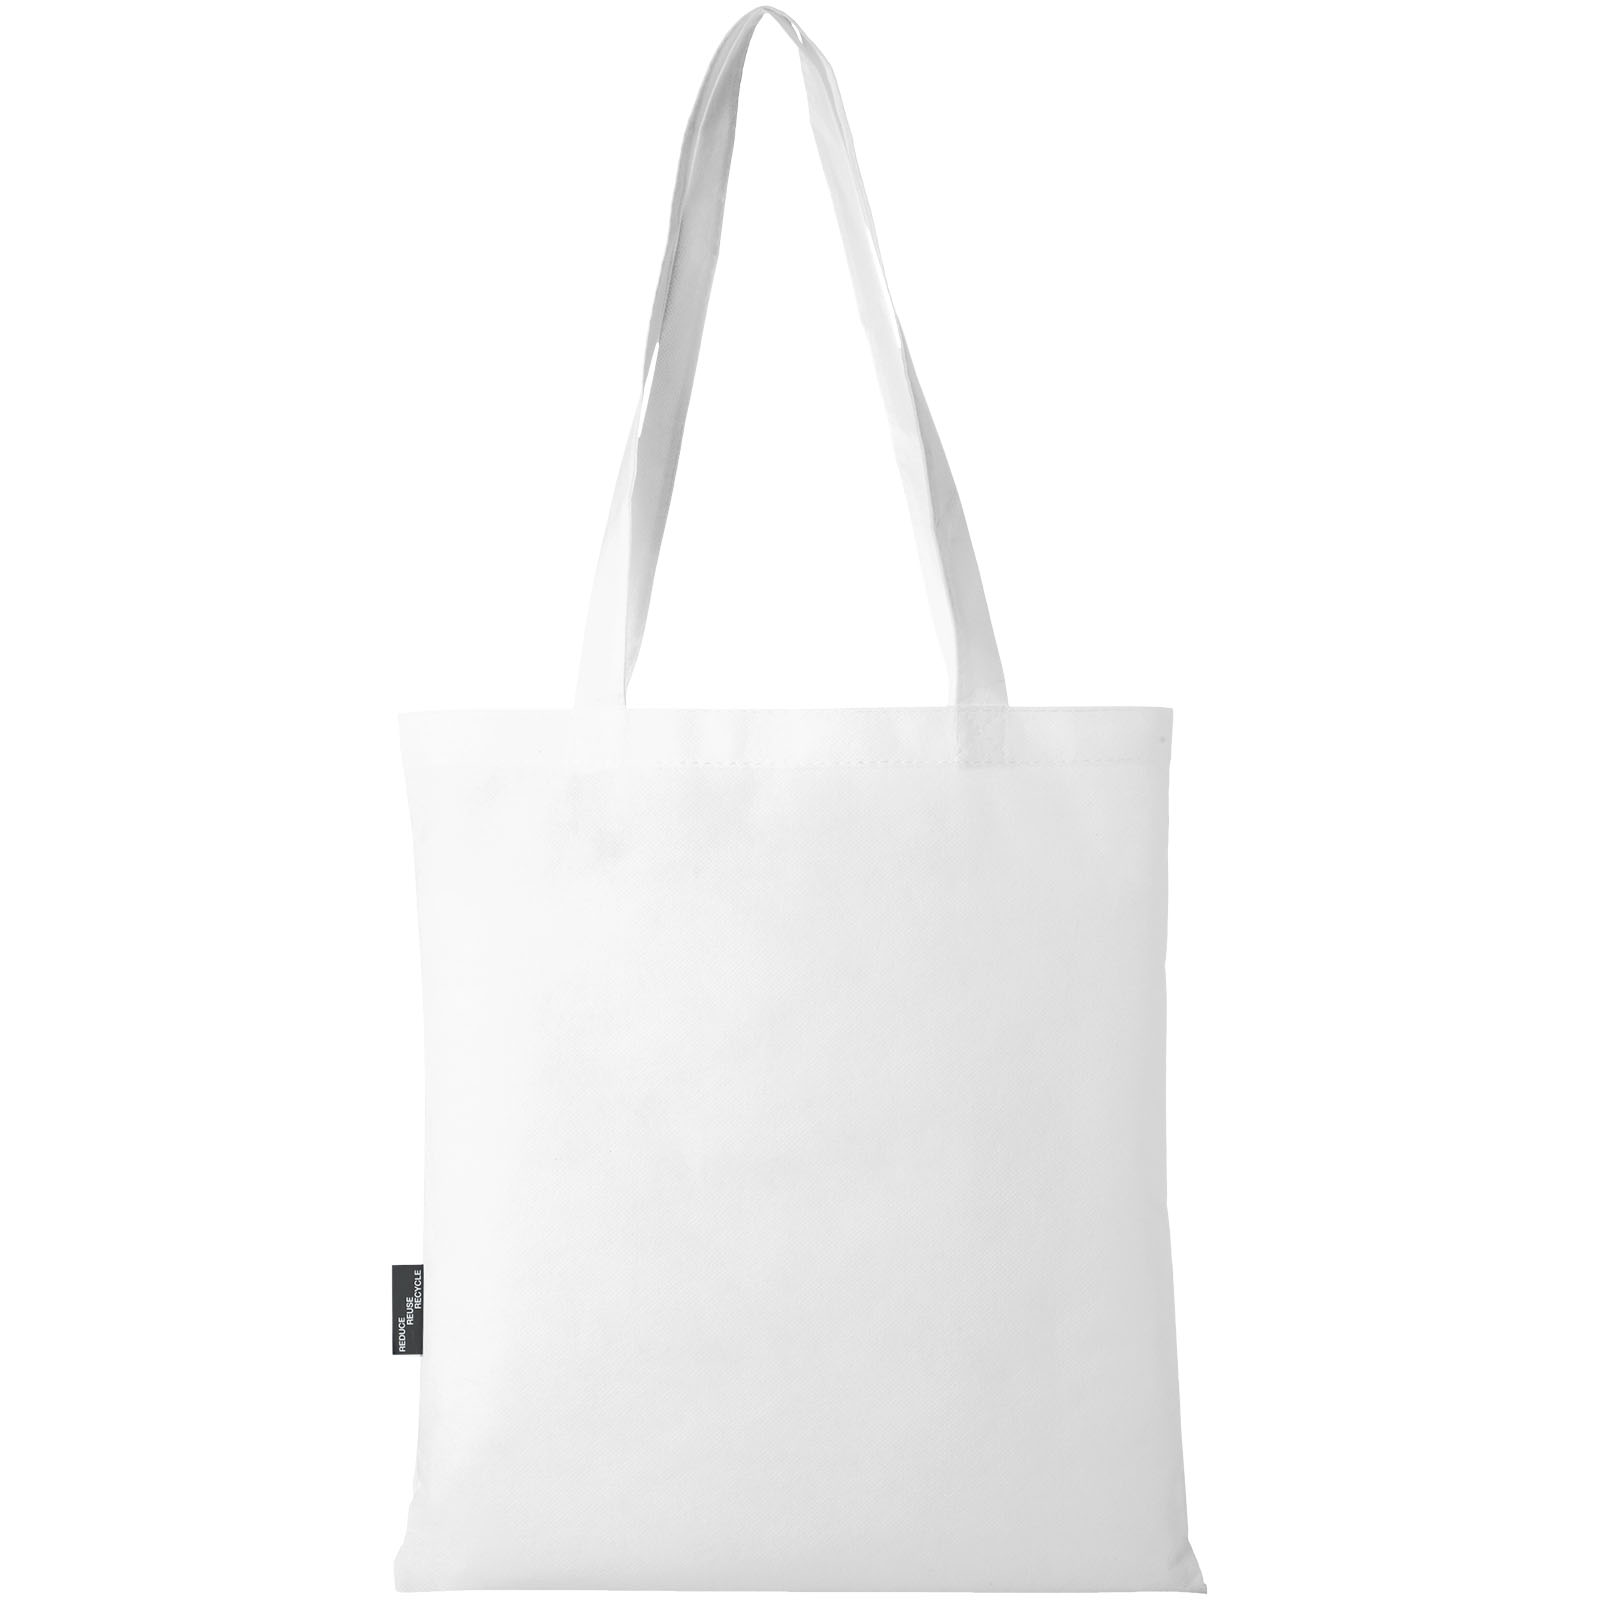 Advertising Shopping & Tote Bags - Zeus GRS recycled non-woven convention tote bag 6L - 2